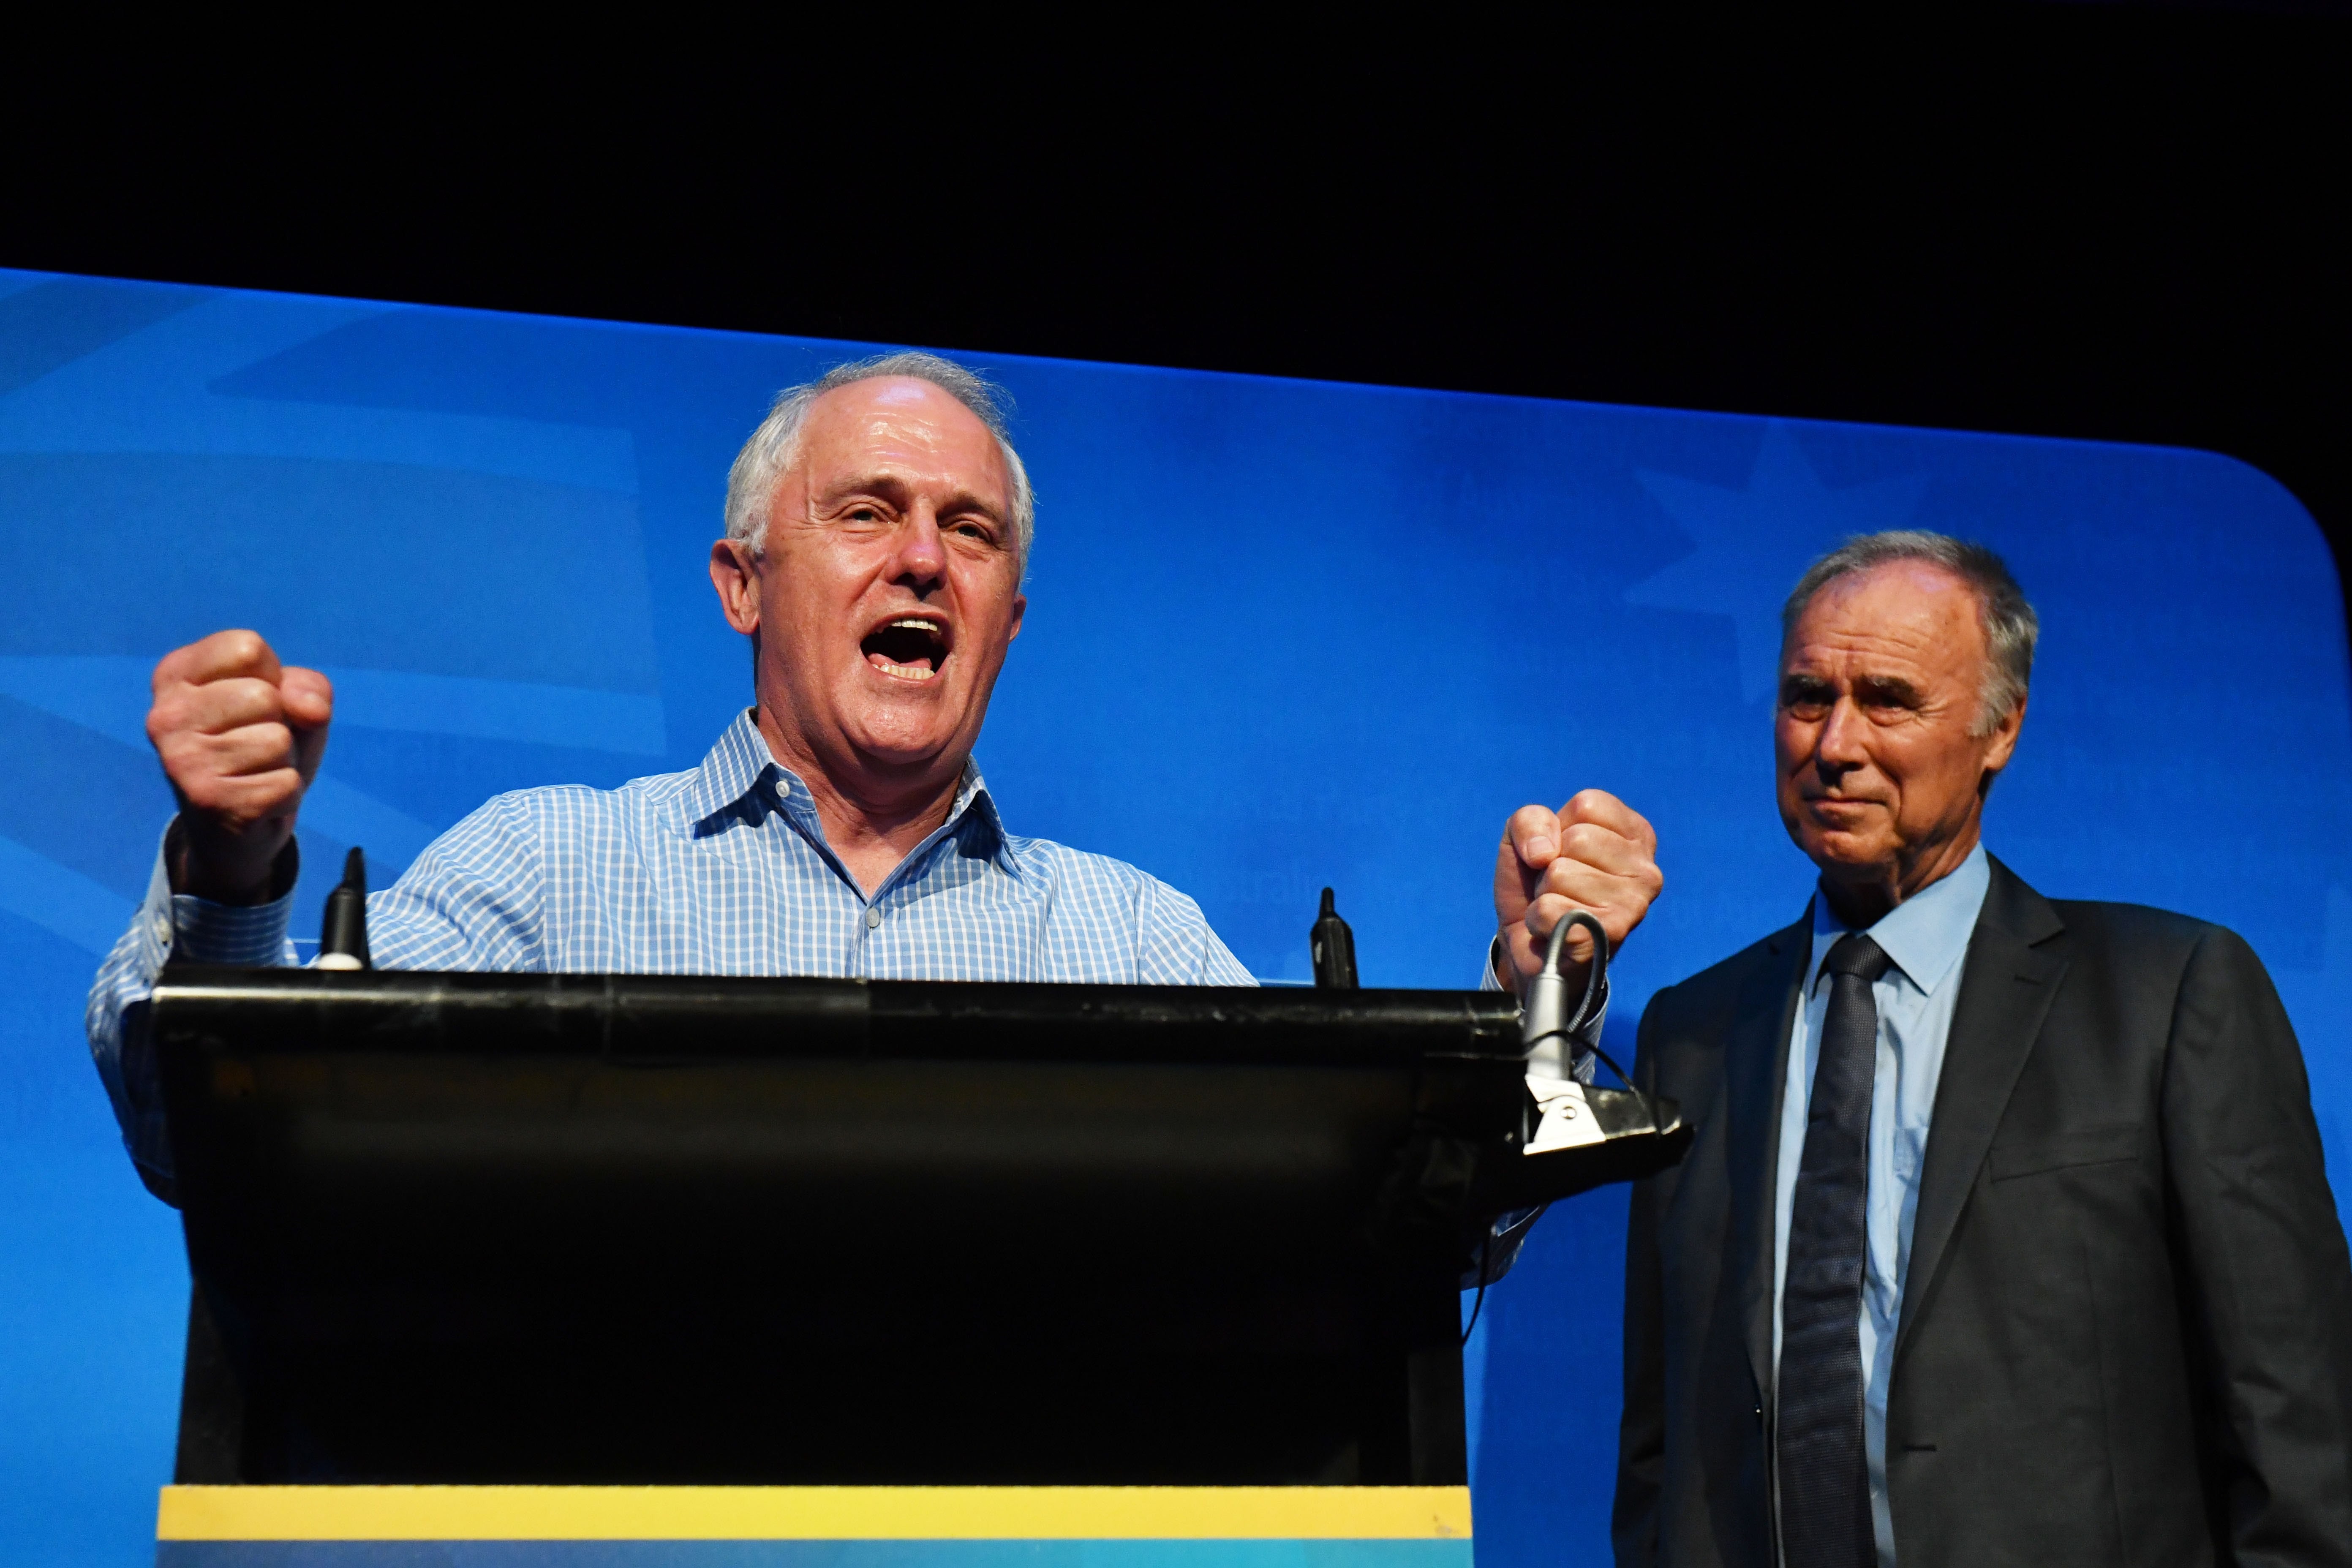 New Liberal member for Bennelong John Alexander watches Australian Prime Minister Malcolm Turnbull celebrate the by-election victory at the West Ryde Leagues Club. Photo: EPA